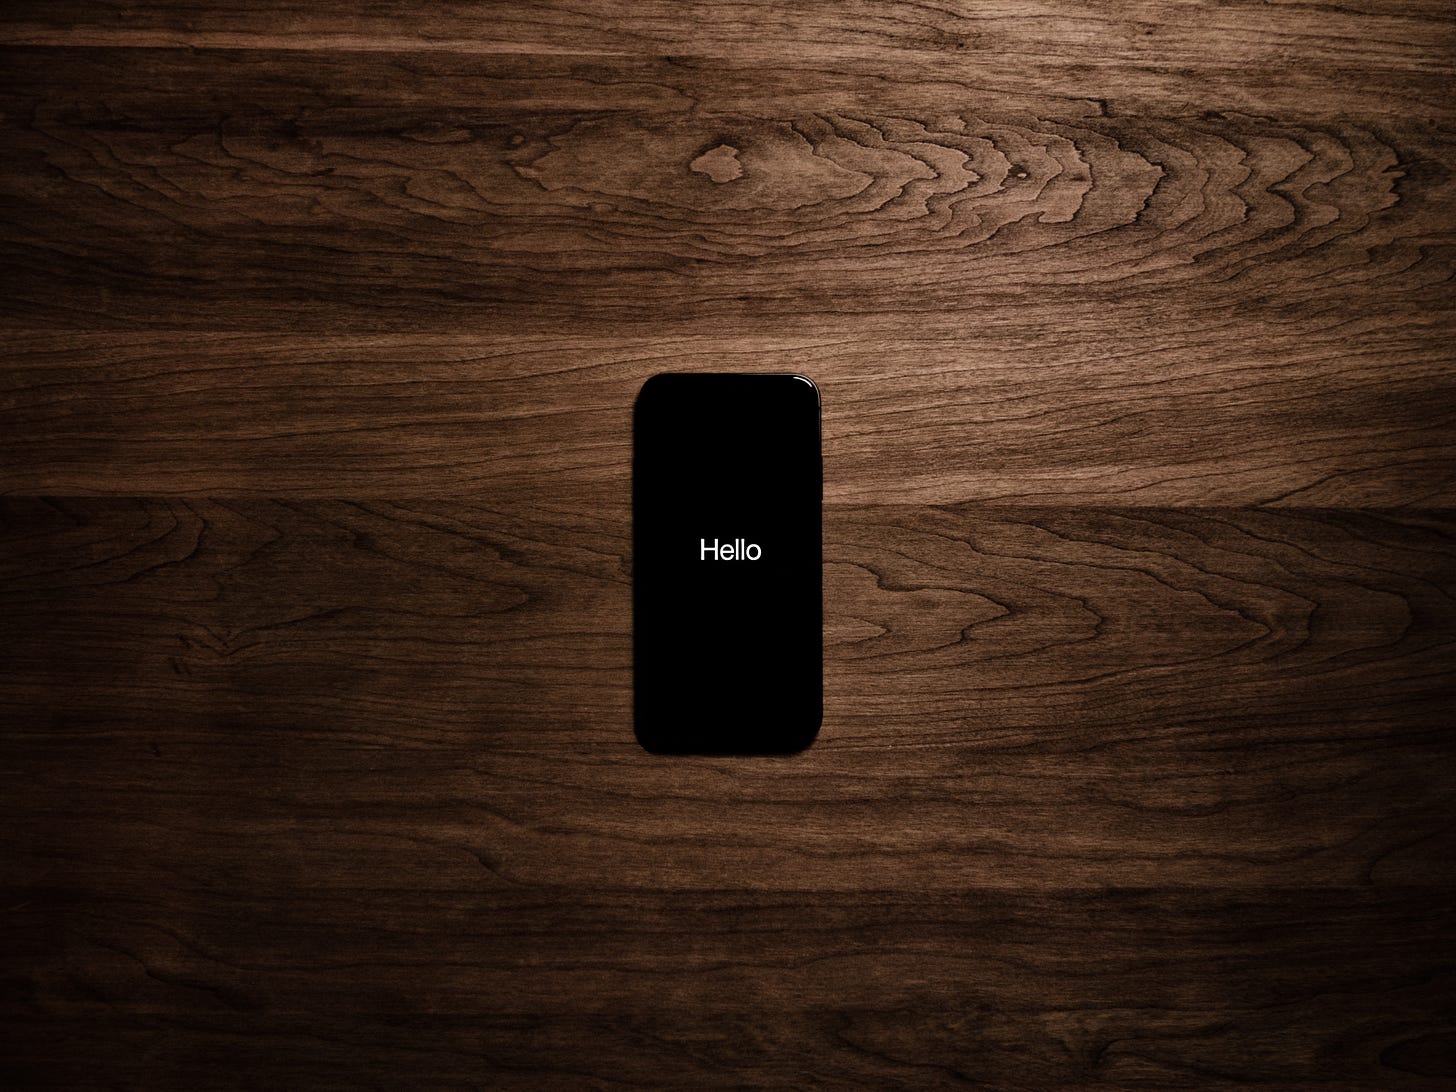 Phone on wood background with hello displayed on the screen